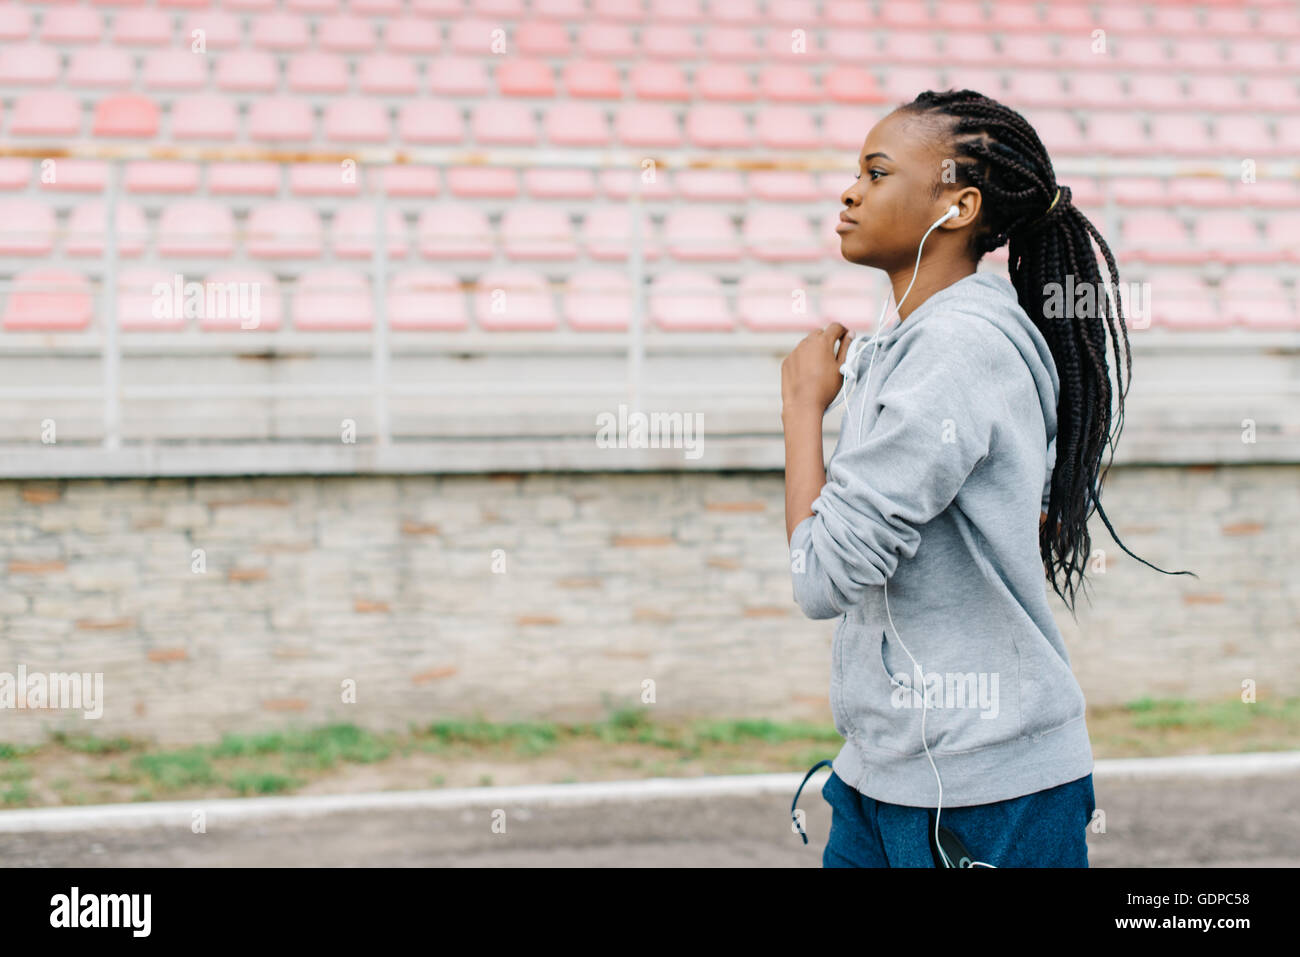 Fitness, sport, training, people and lifestyle concept - african american woman running on track outdoors Stock Photo